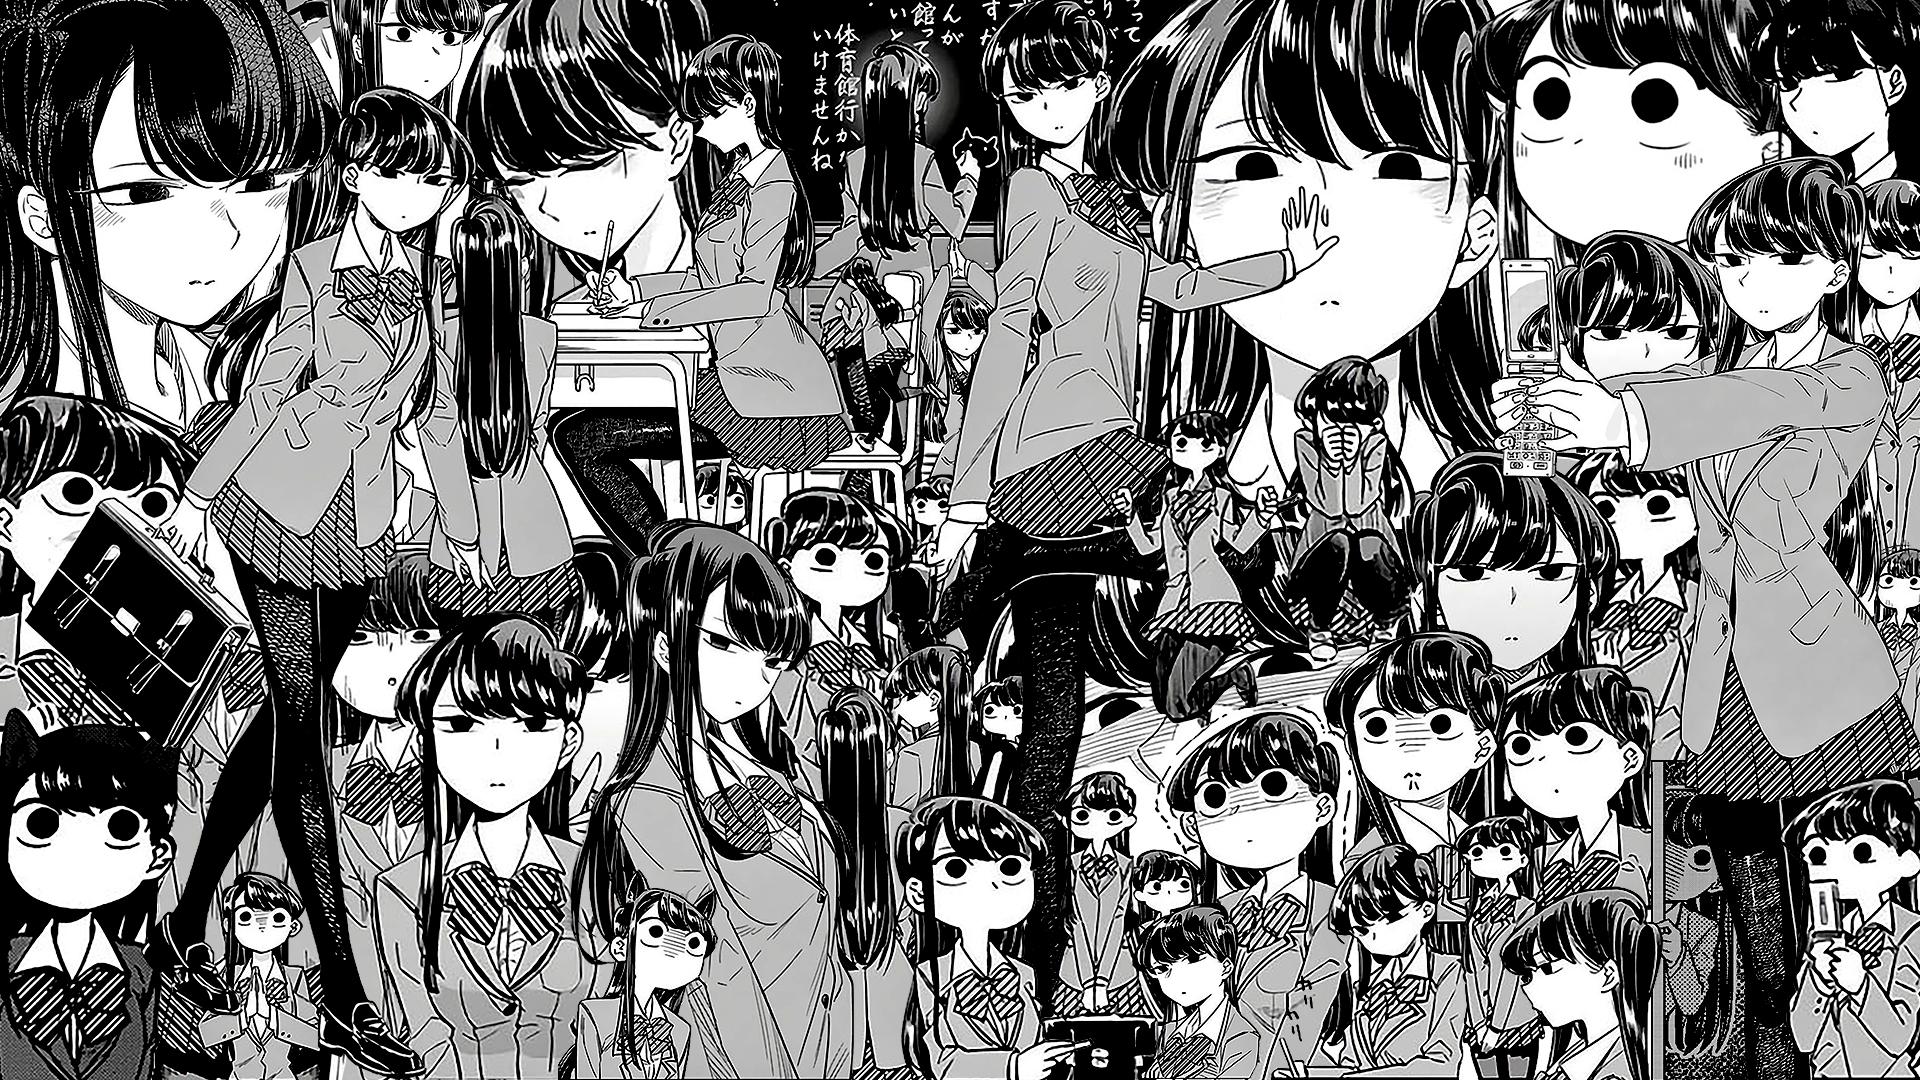 Made this to represent what it's like on my mind and Tadano's mind's all Komi, Komi_san